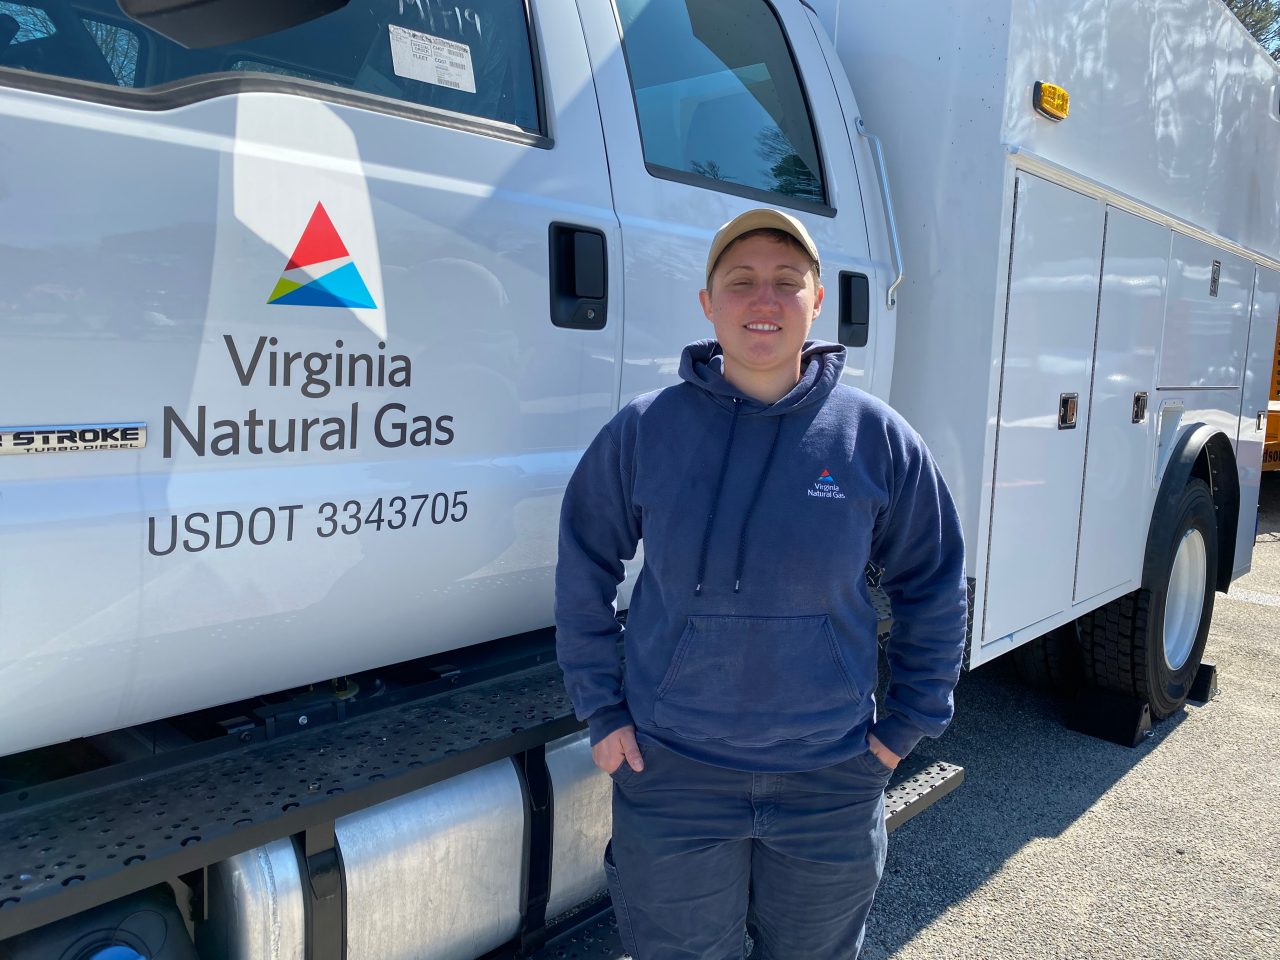 Catherine "Cat" Kinyk is a utility mechanic with Virginia Natural Gas